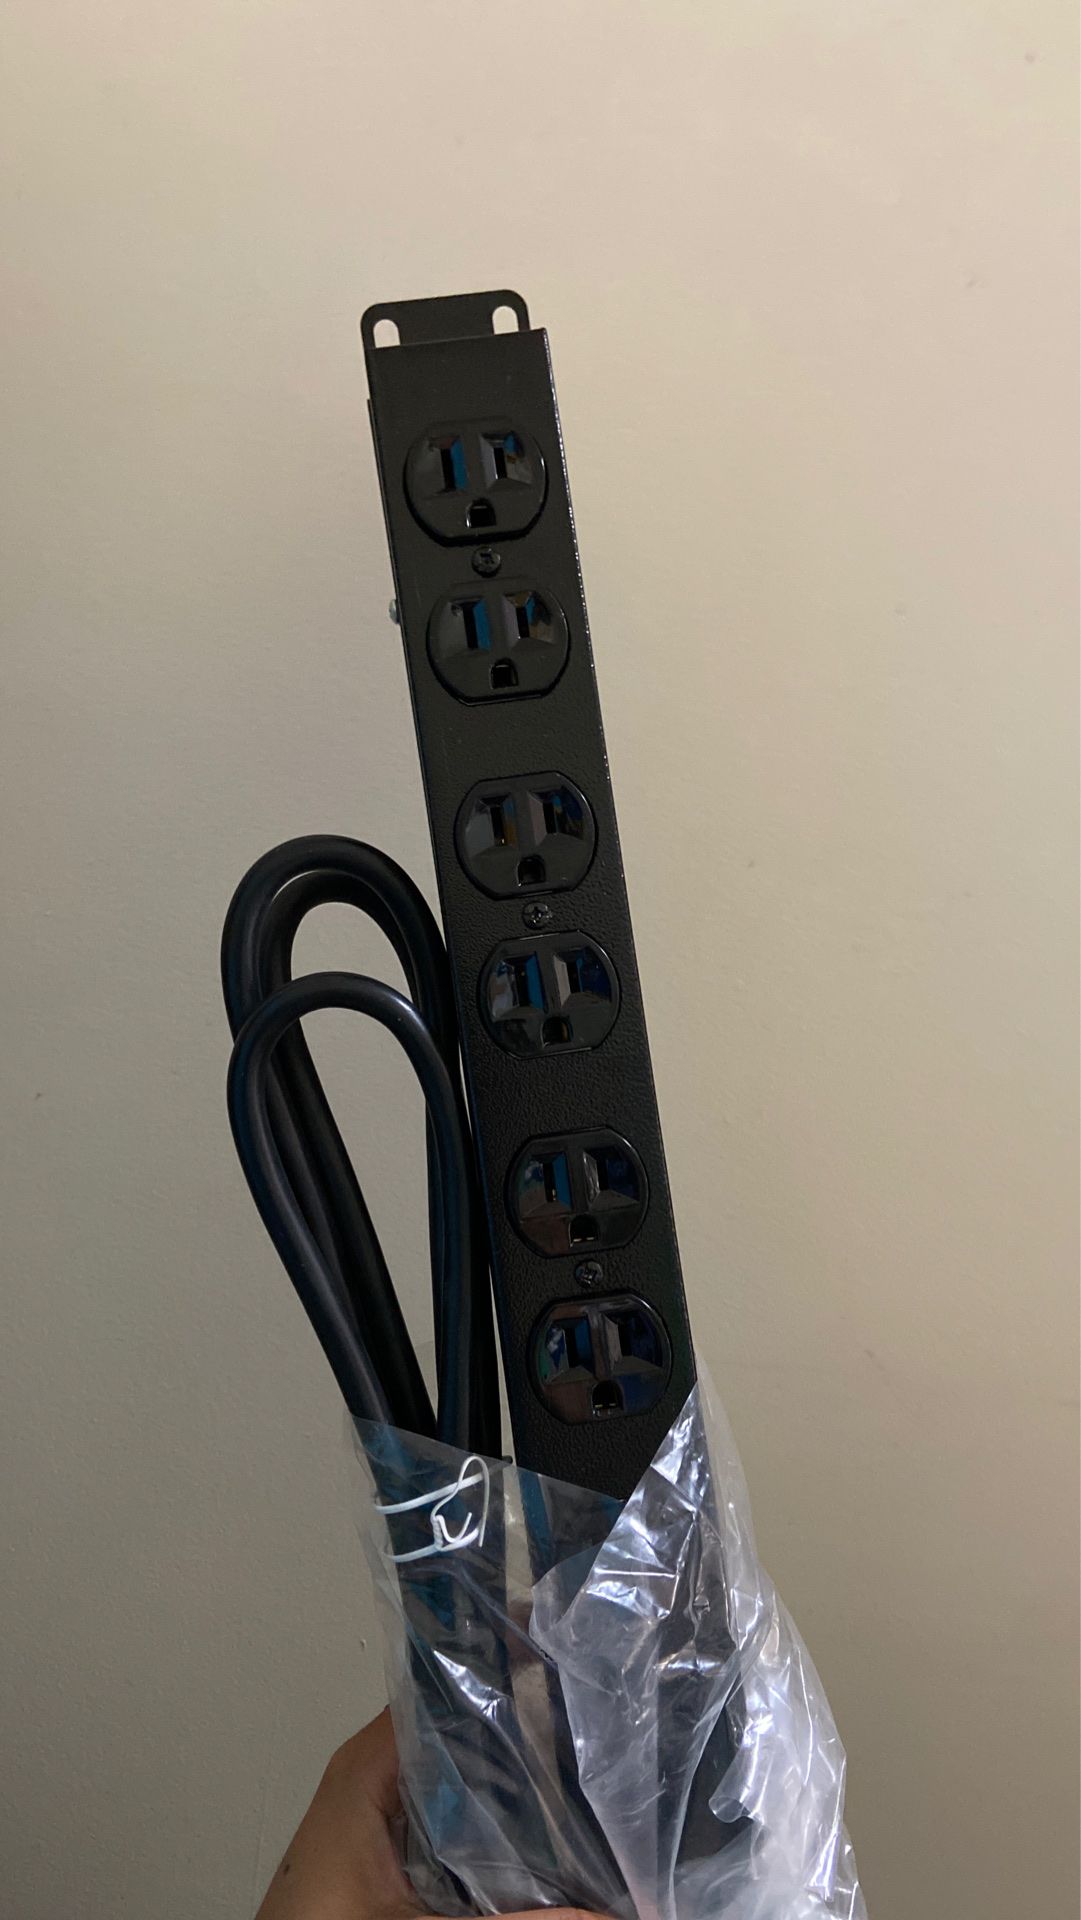 Heavy Duty Metal Power Strip 8 Outlets,Workshop Power Strip Surge Protector,Metal Wall Mount Power Strip with Switch.15A,125V,1875W